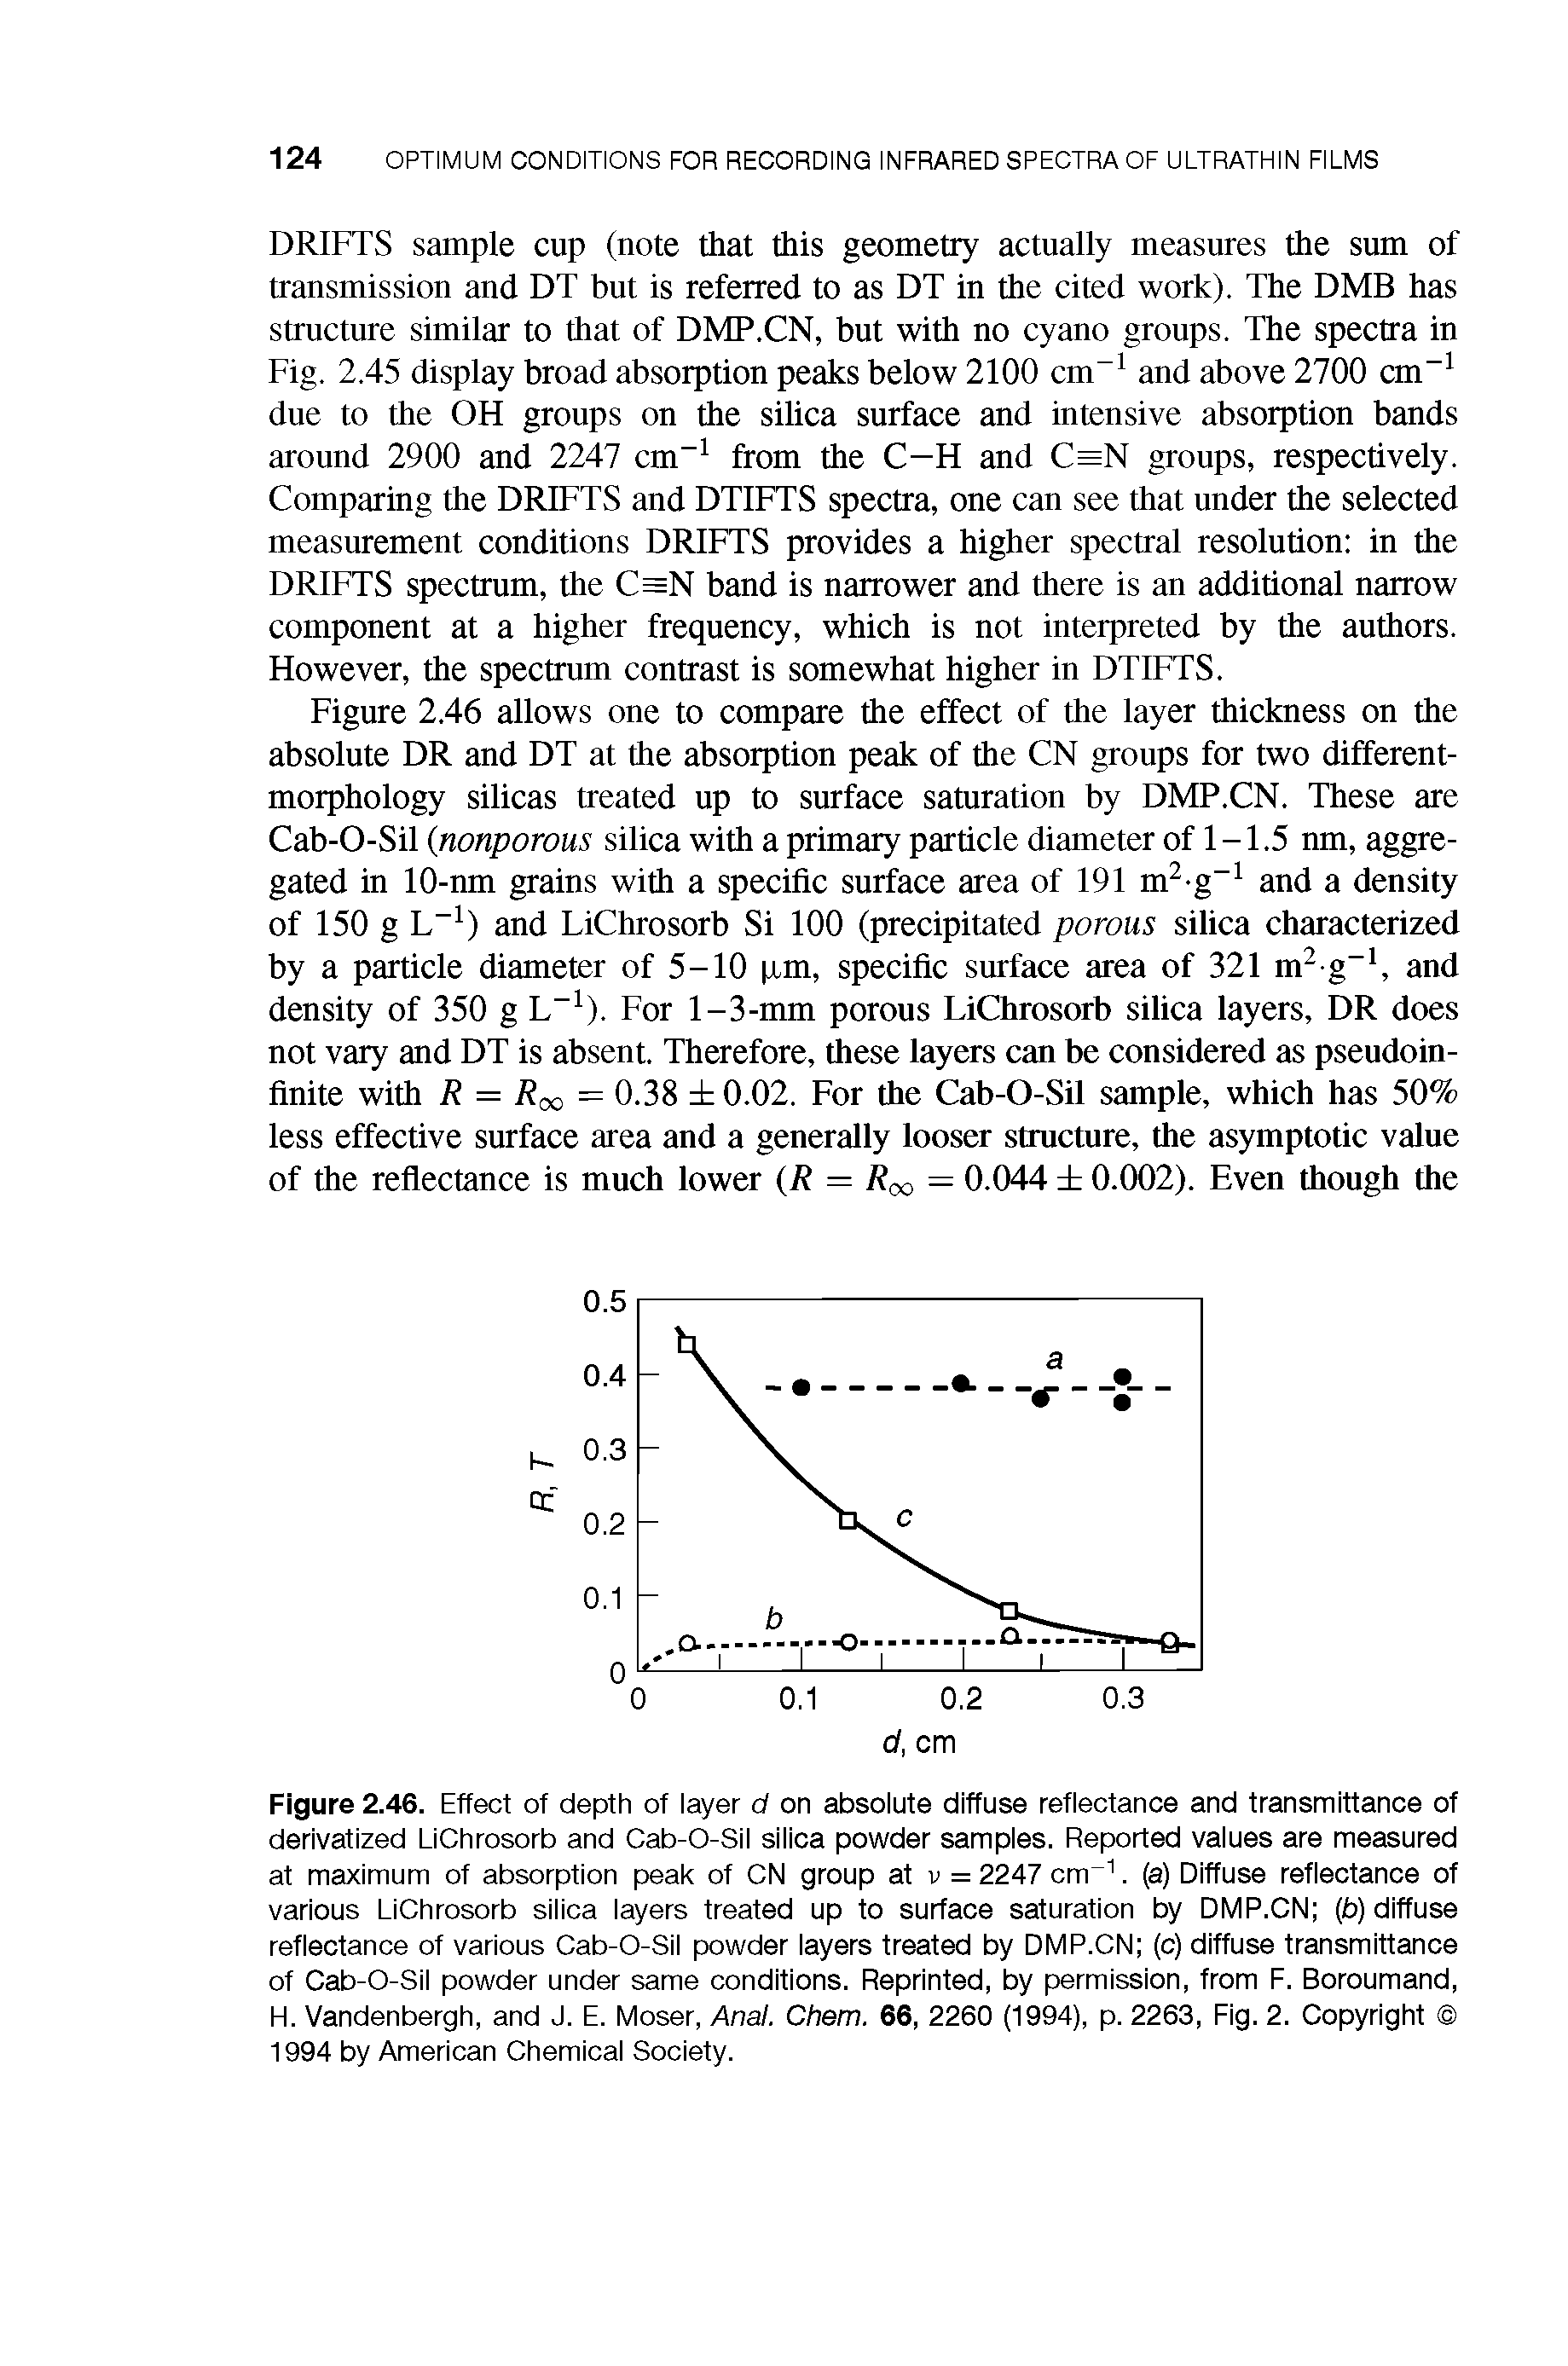 Figure 2.46. Effect of depth of layer d on absolute diffuse reflectance and transmittance of derivatized LiChrosorb and Cab-O-Sil silica powder samples. Reported values are measured at maximum of absorption peak of CN group at v = 2247 cm. (a) Diffuse reflectance of various LiChrosorb silica layers treated up to surface saturation by DMP.CN (b) diffuse reflectance of various Cab-O-Sil powder layers treated by DMP.CN (c) diffuse transmittance of Cab-O-Sil powder under same conditions. Reprinted, by permission, from F. Boroumand, H. Vandenbergh, and J. E. Moser, Anal. Chem. 66, 2260 (1994), p. 2263, Fig. 2. Copyright 1994 by American Chemical Society.